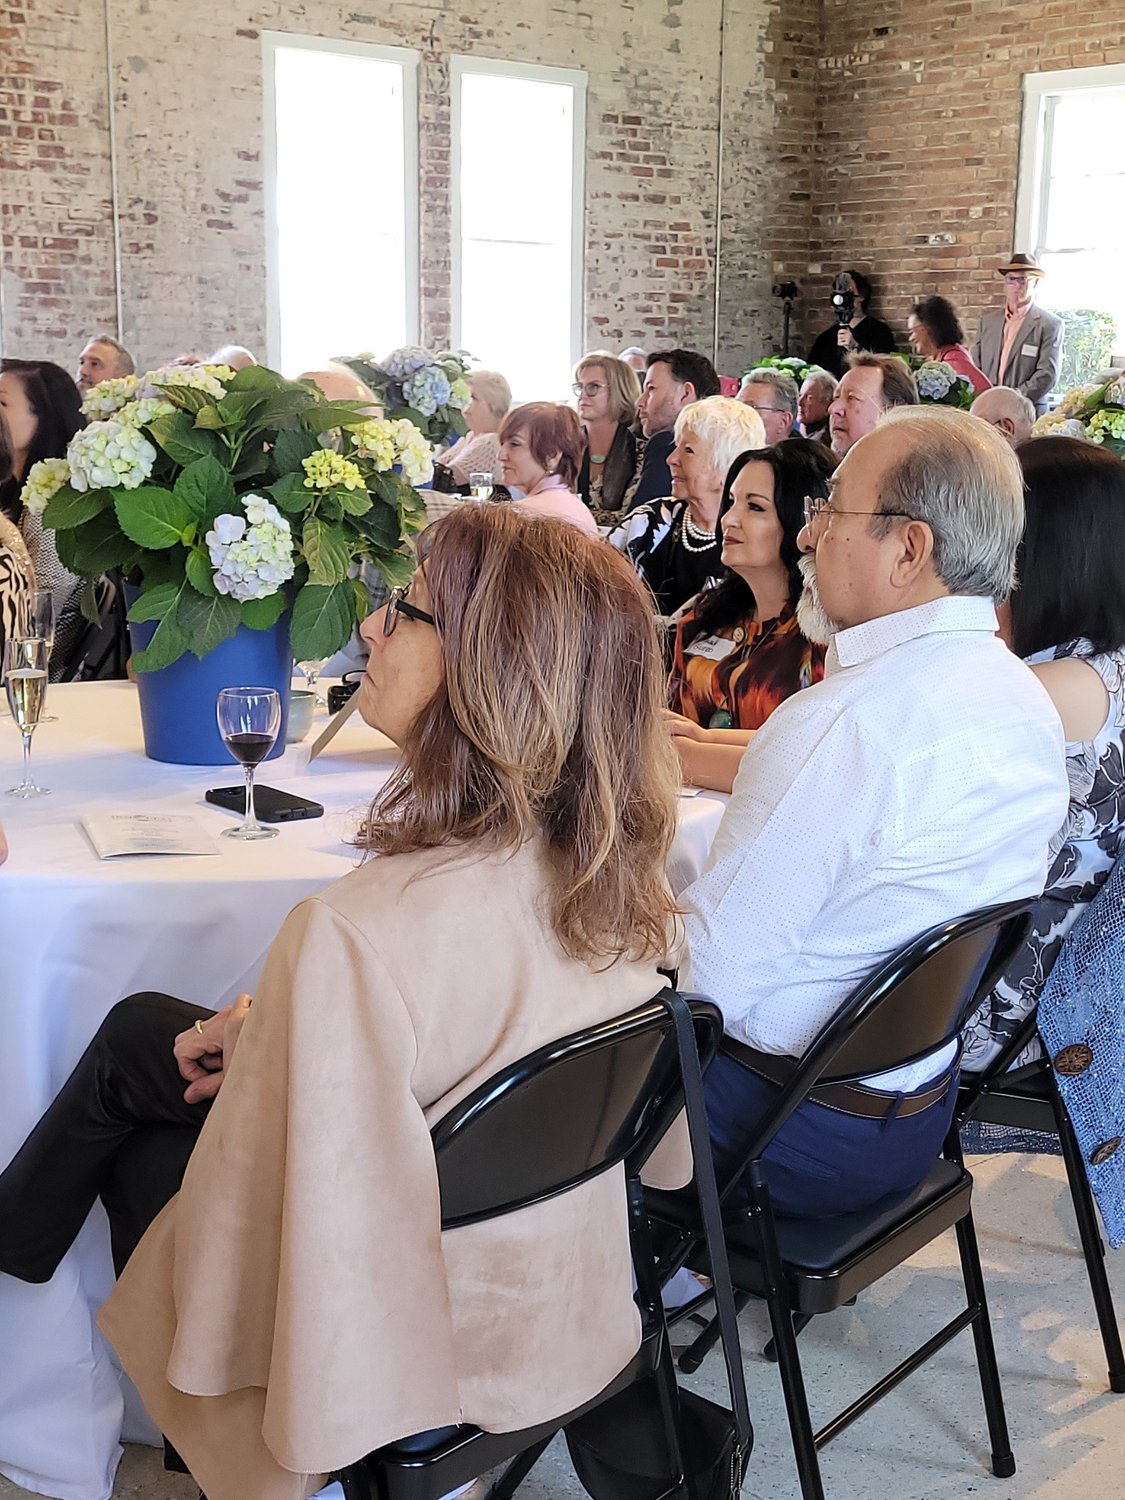 St. Johns Cultural Council ROWITA awards event recipients and attendees are seated round a table at The Waterworks.